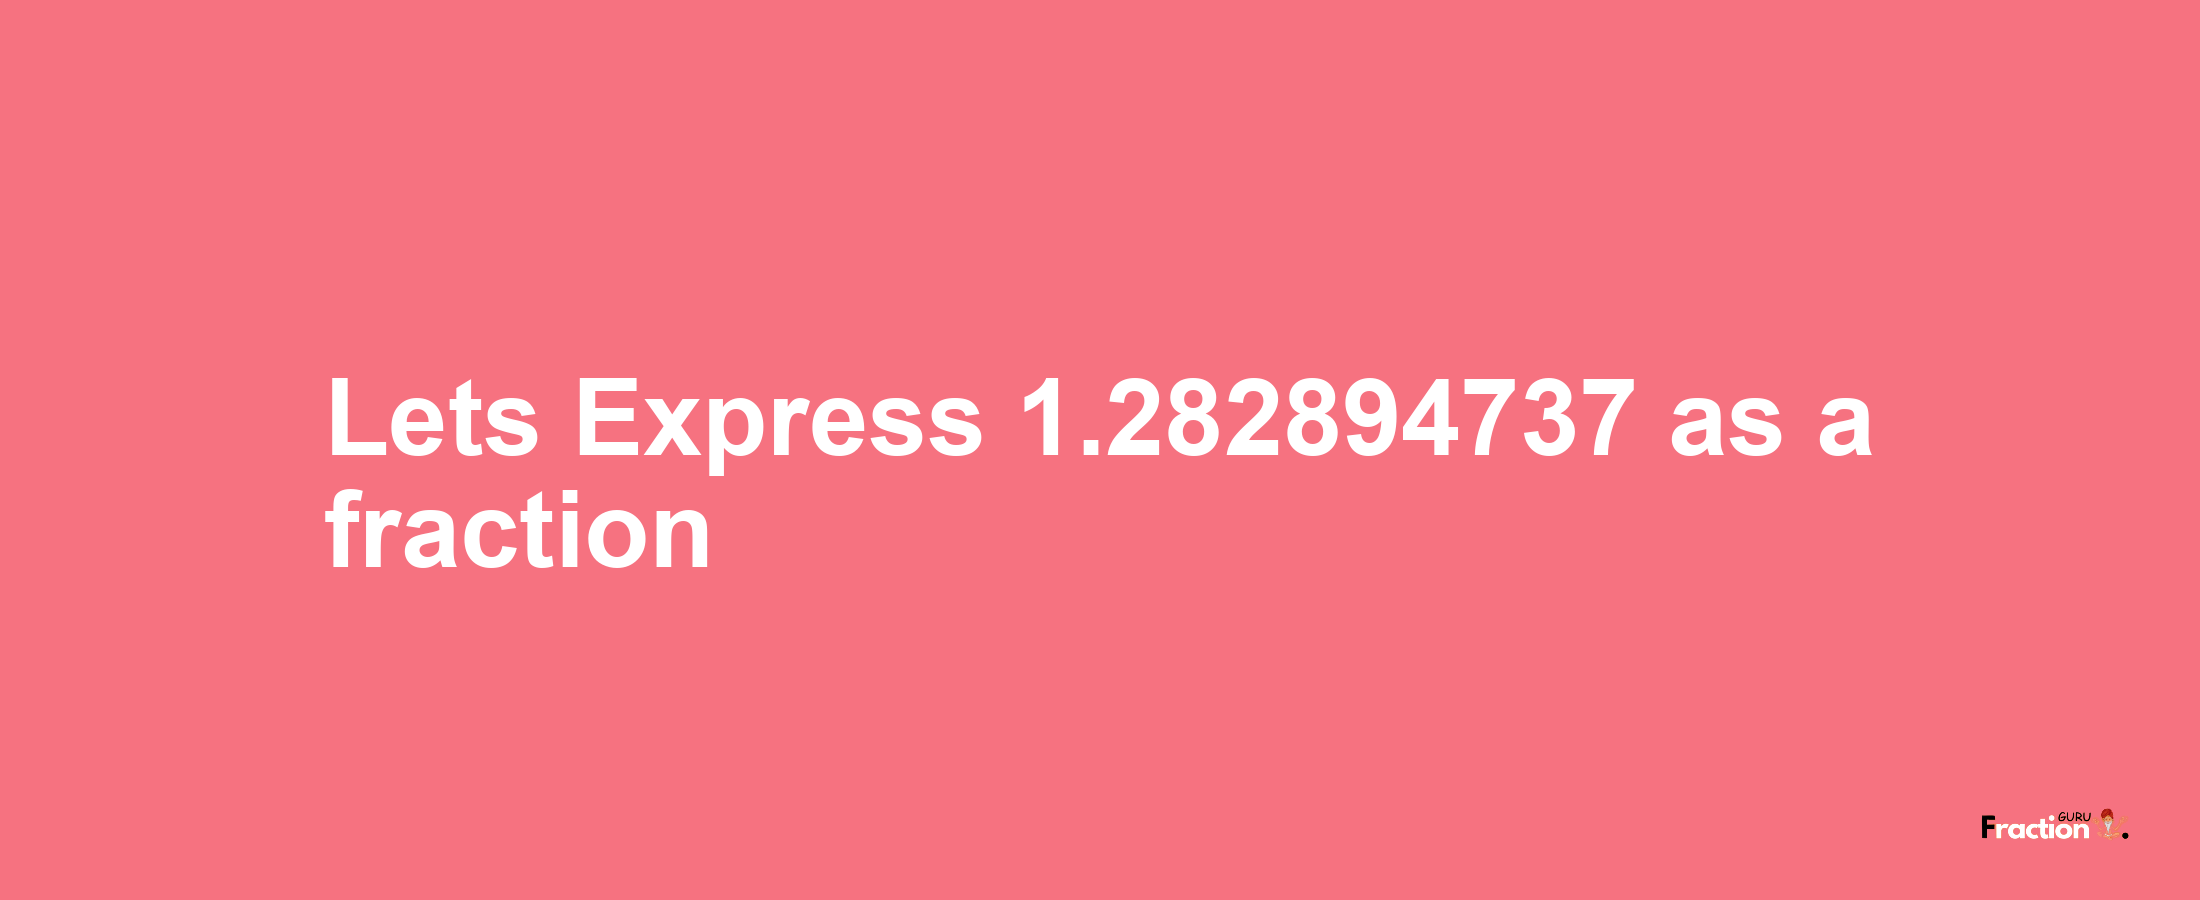 Lets Express 1.282894737 as afraction